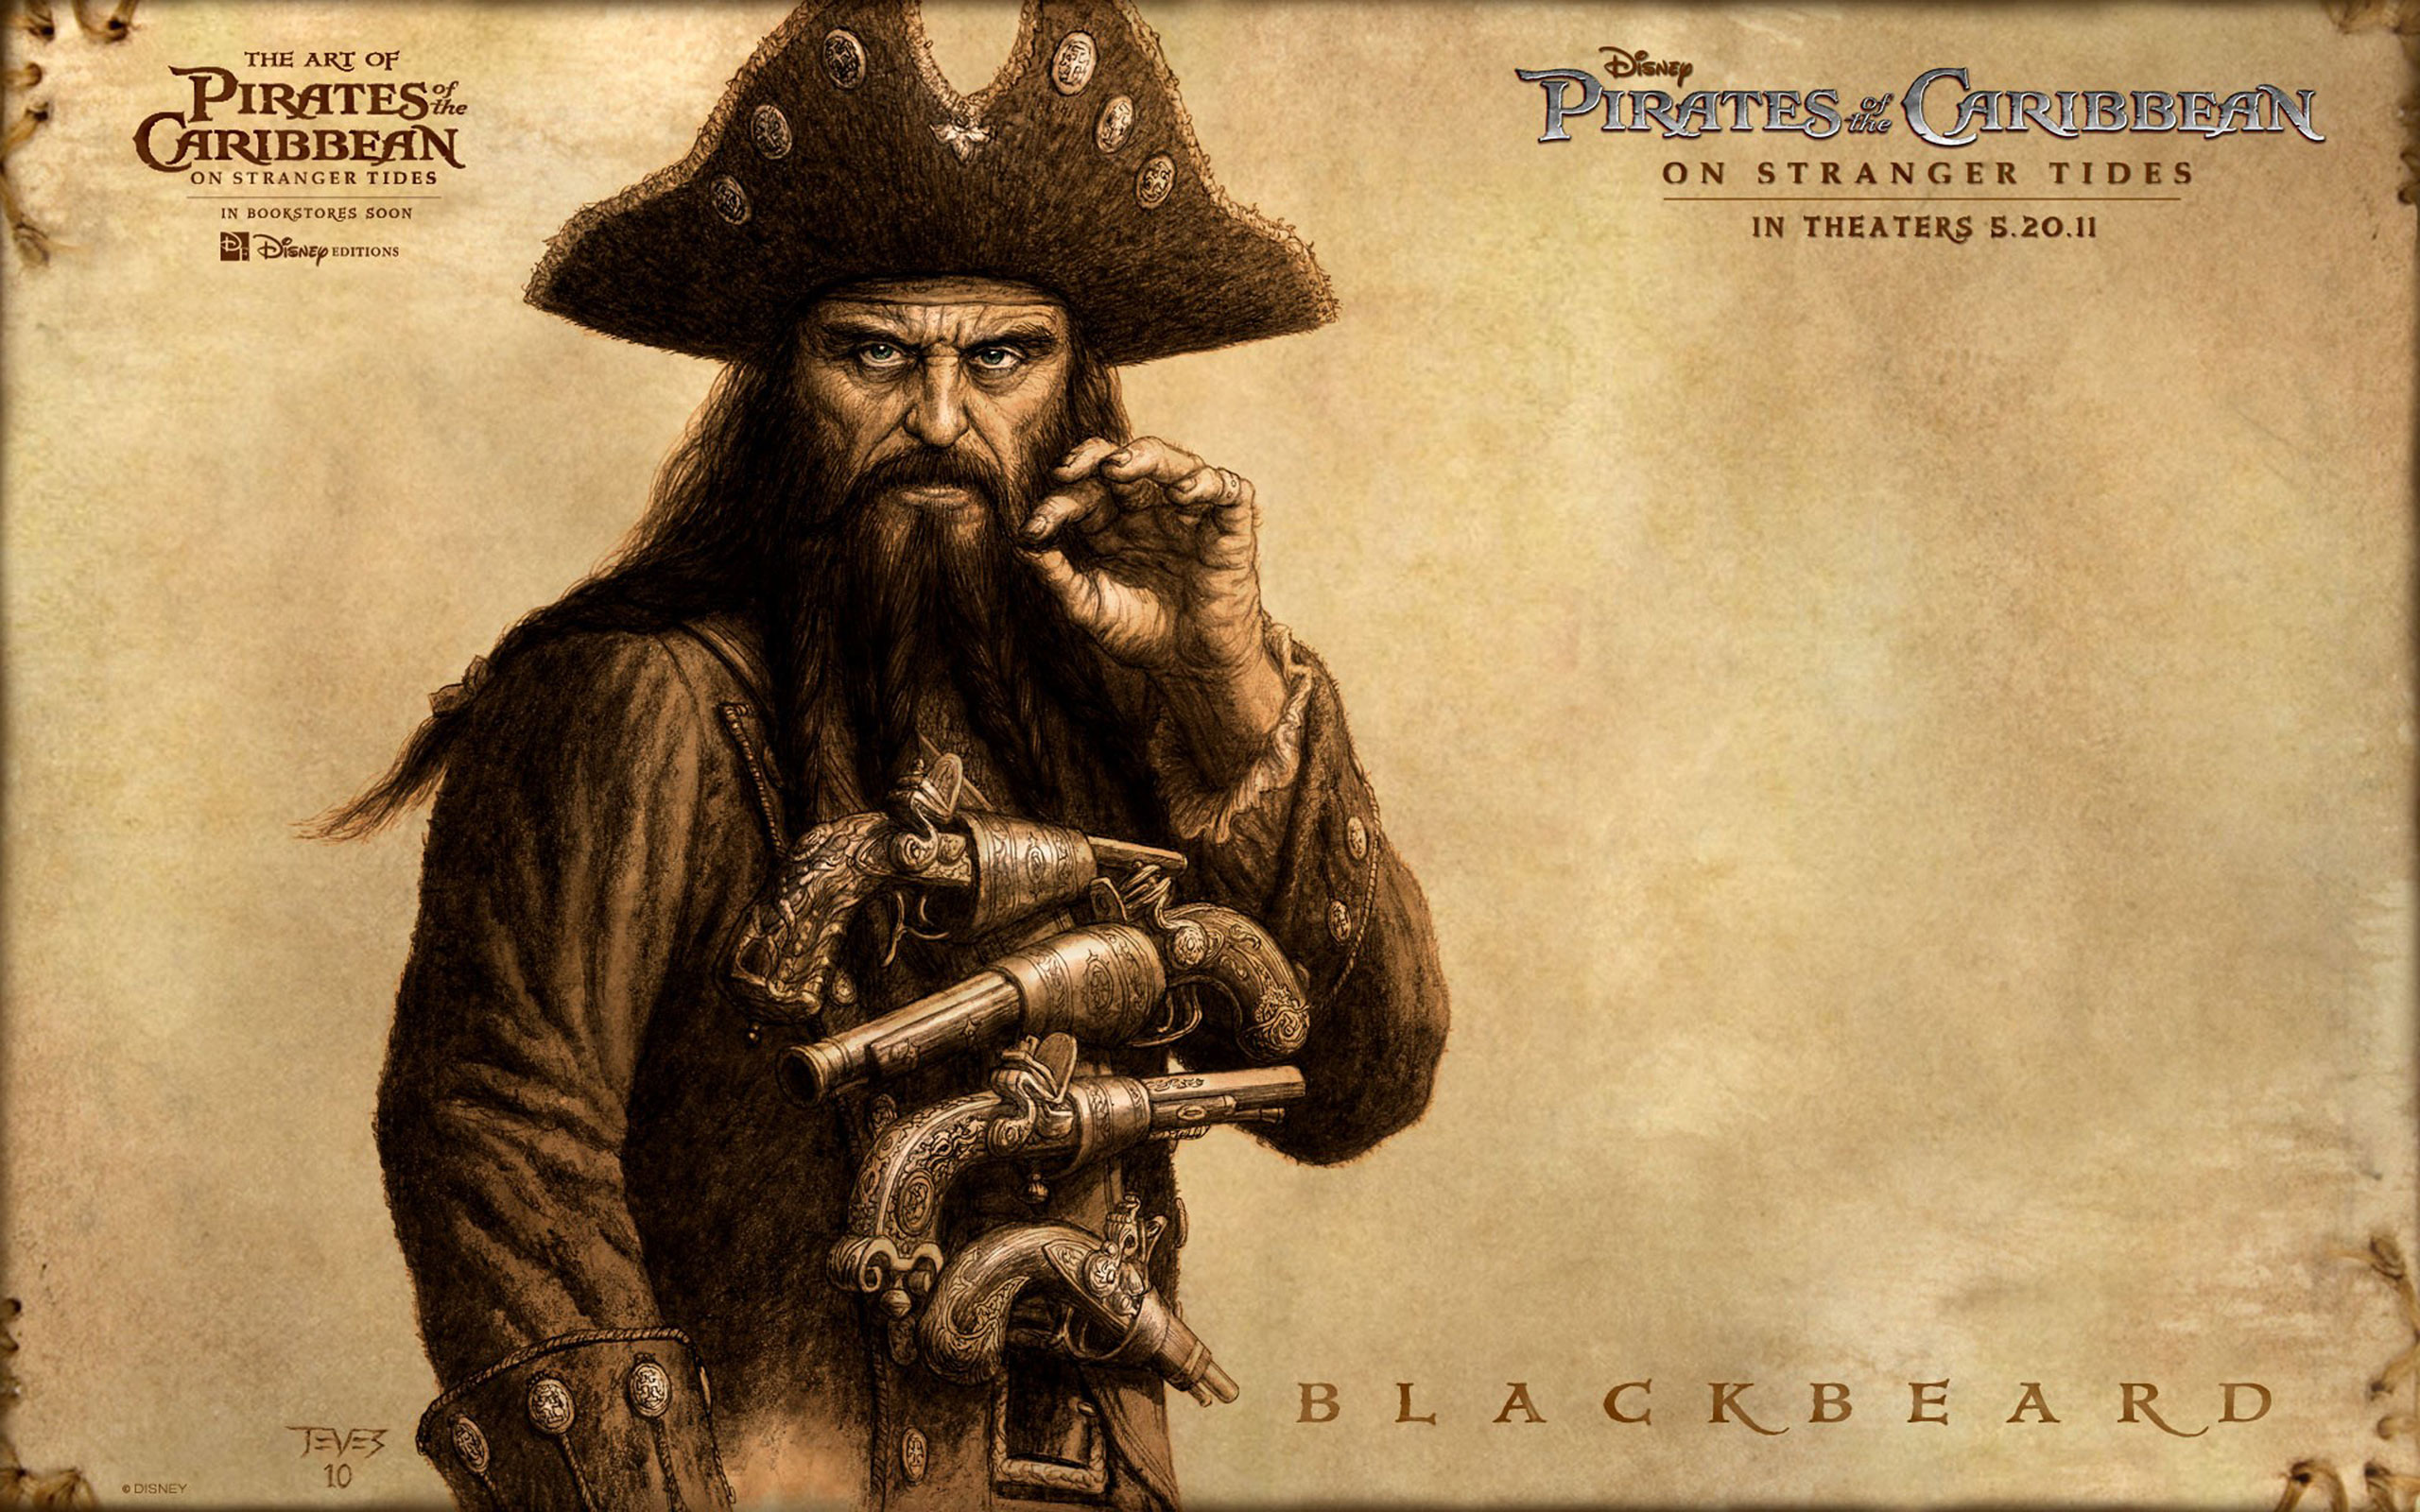 pirate, movie, pirates of the caribbean: on stranger tides, blackbeard (pirates of the caribbean), ian mcshane, pirates of the caribbean images